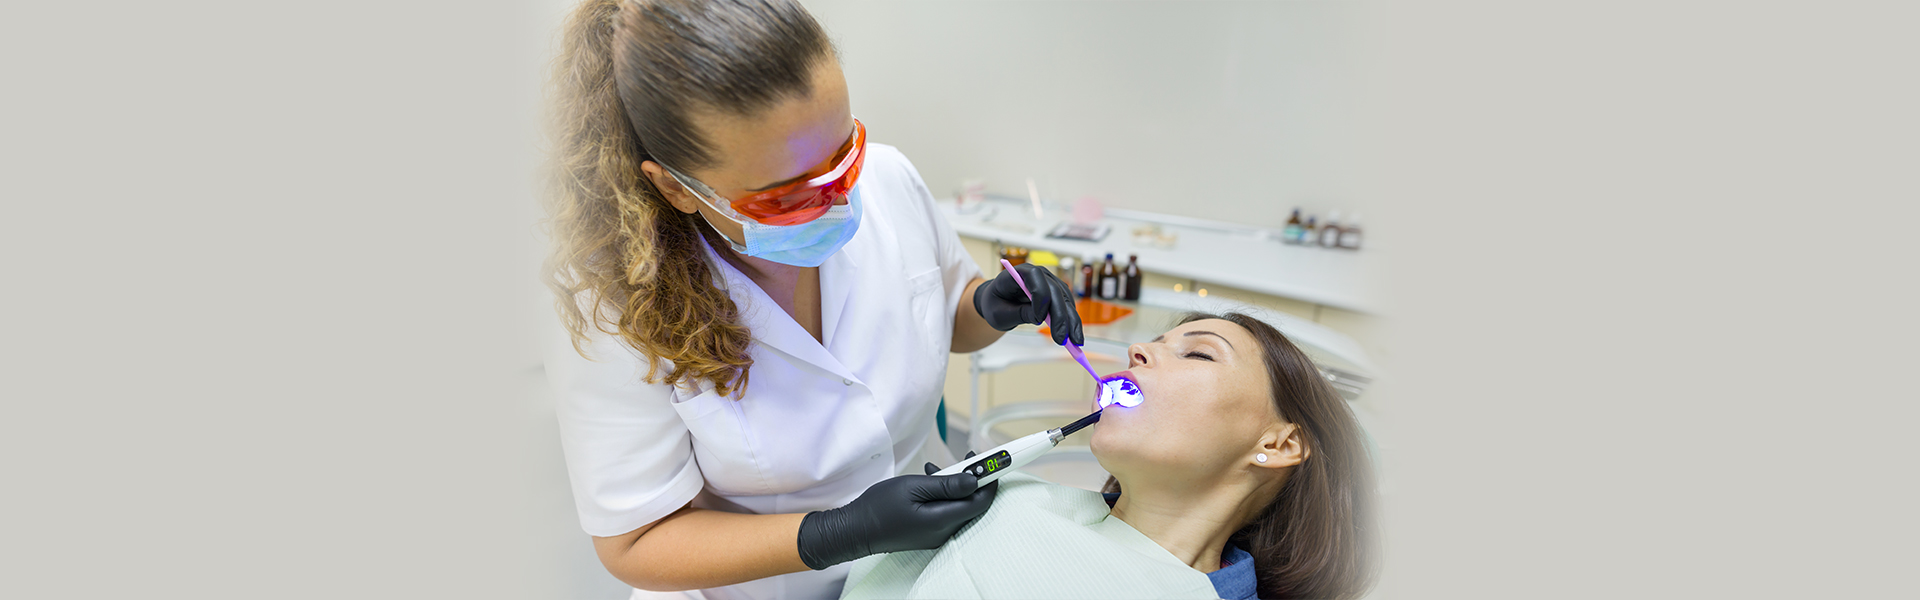 Why You May Need an Oral Cancer Screening During Your Dental Exam